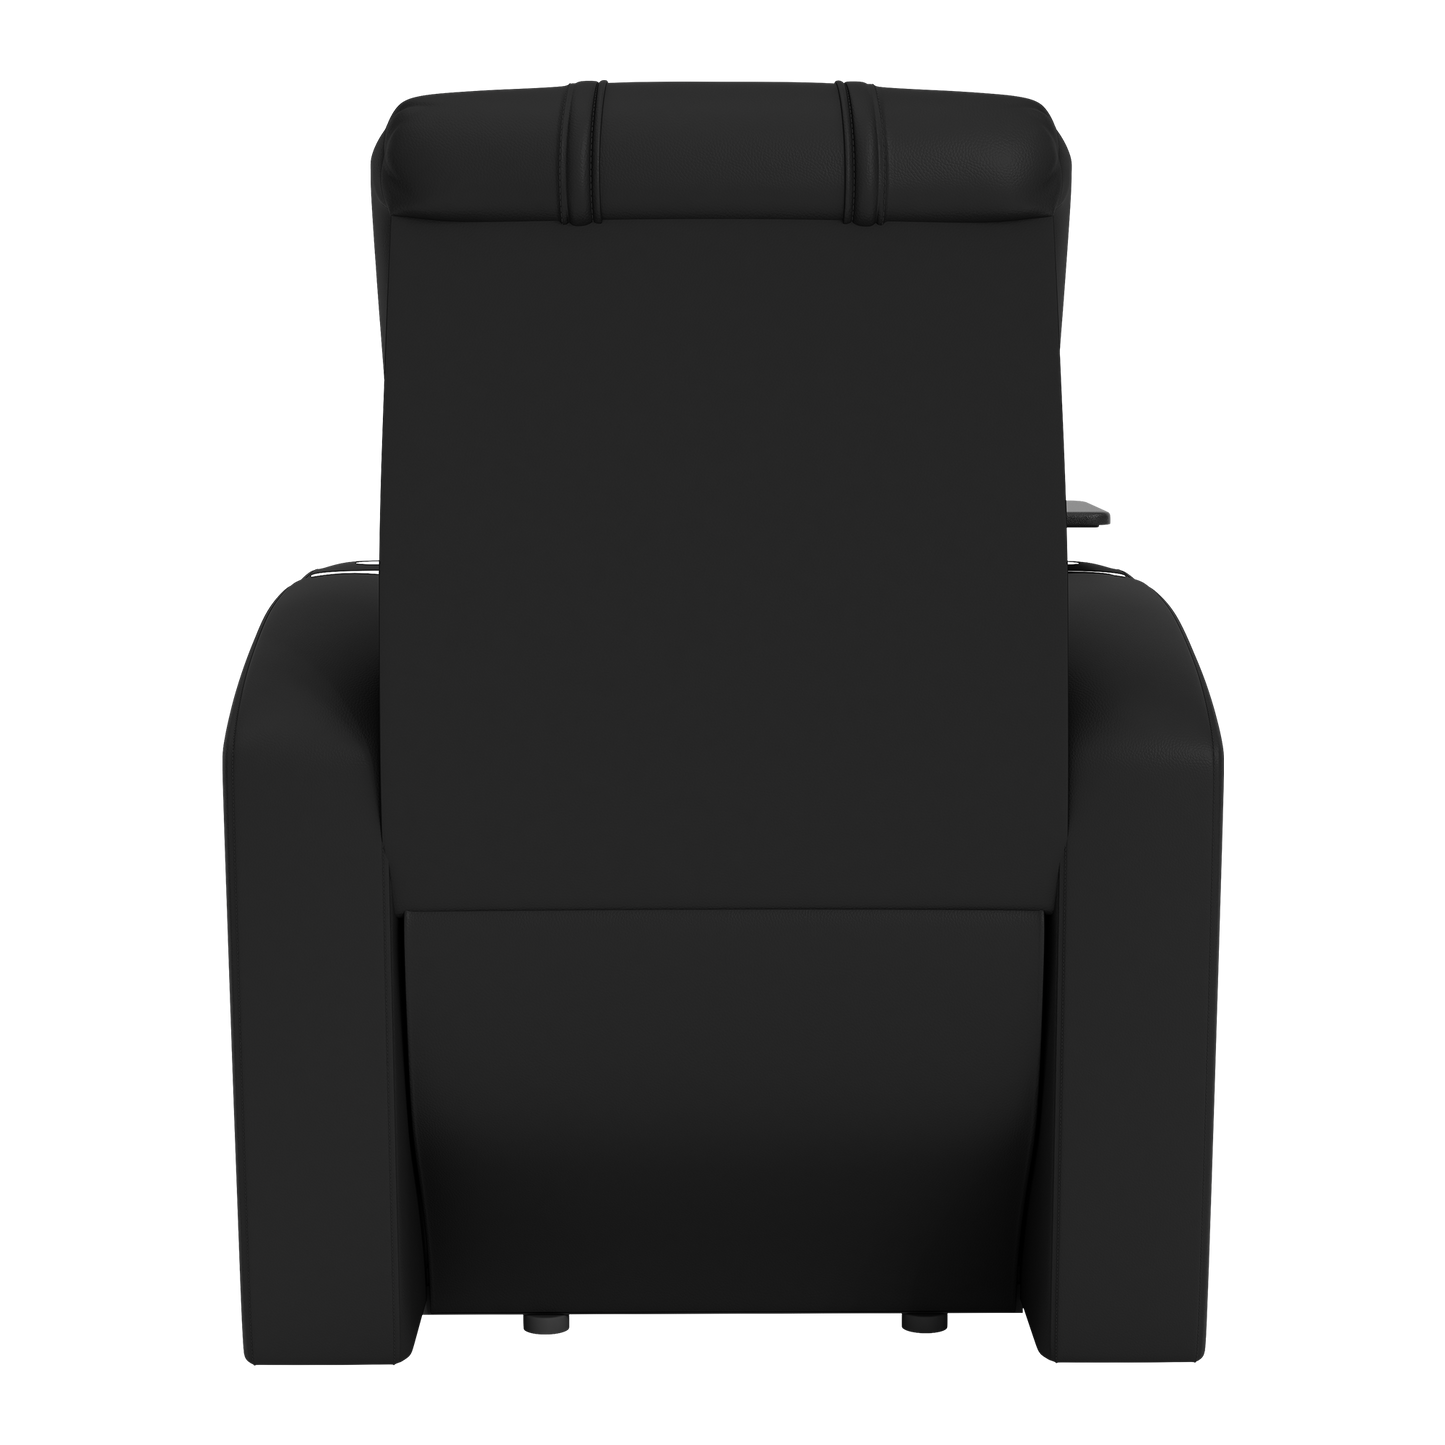 Stealth Power Plus Recliner with Buick Logo